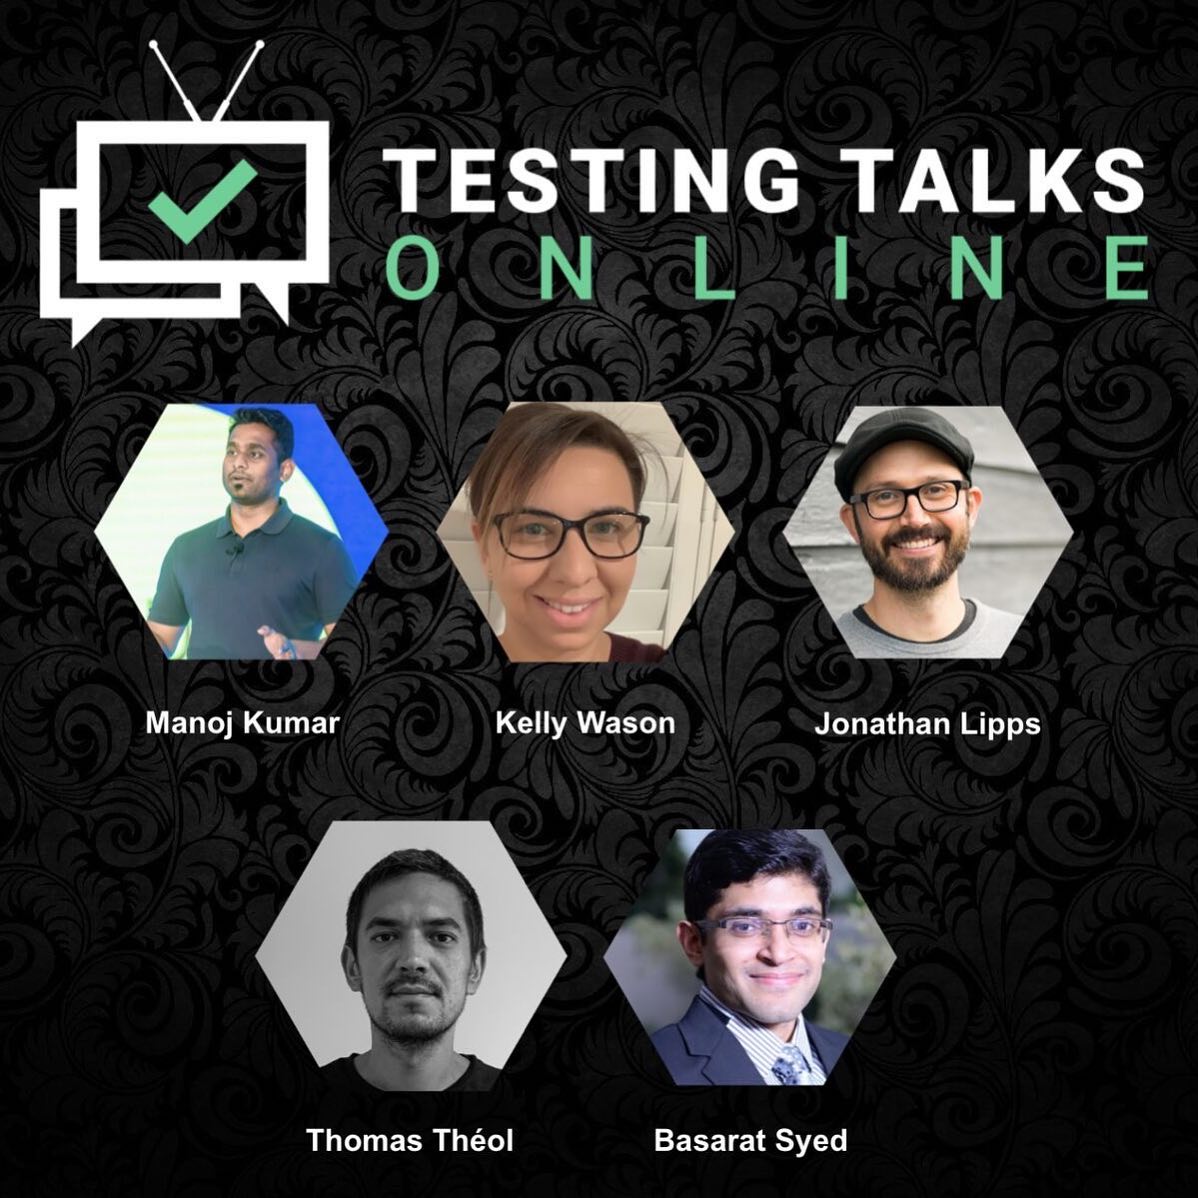 Check out the amazing global line-up of industry-leading testers for our next Testing Talks Online